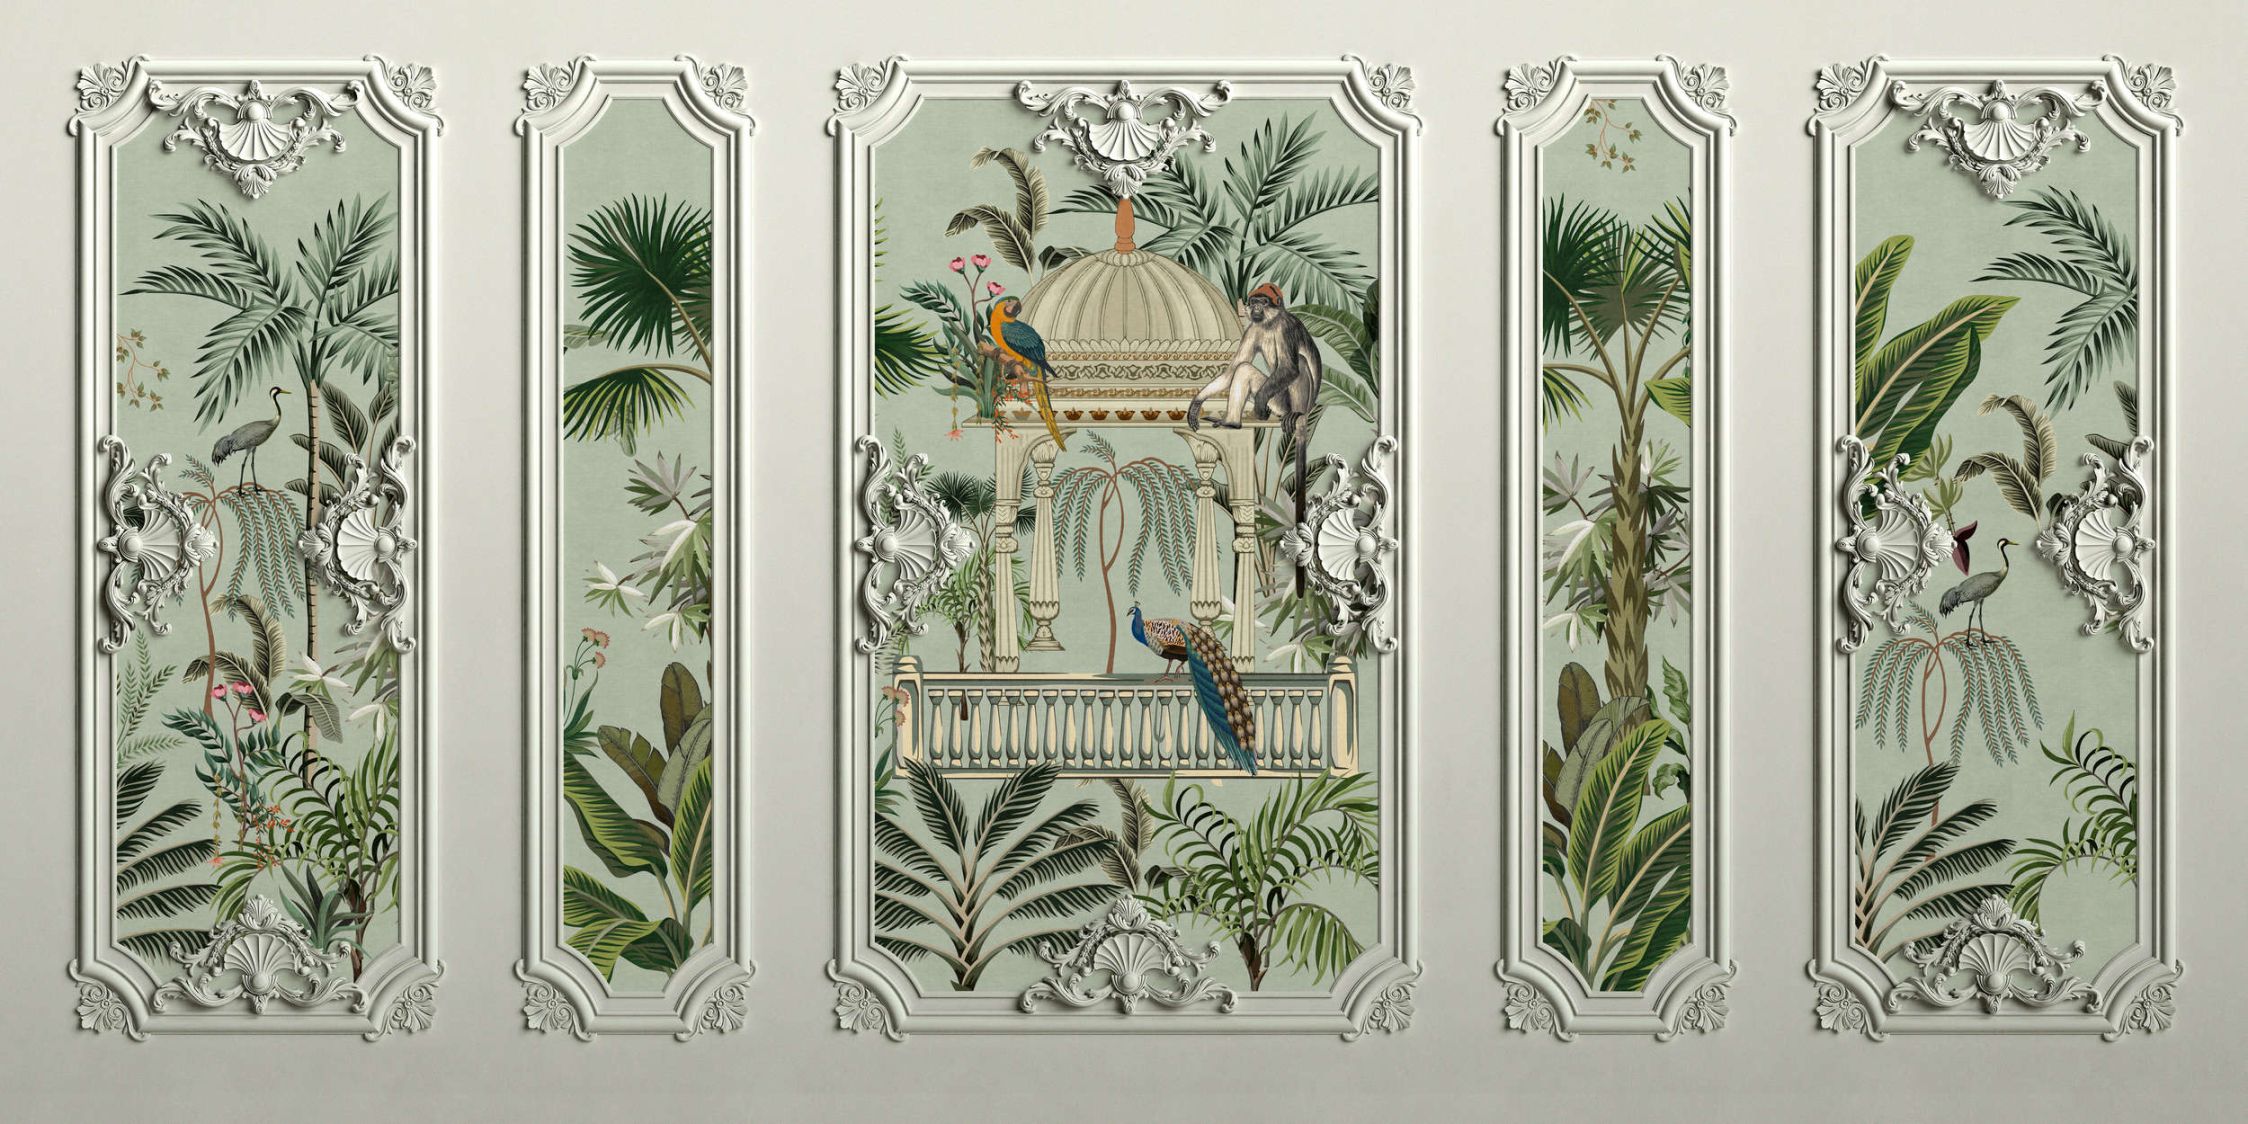             Photo wallpaper »darjeeling« - Stucco frame look with birds & palm trees with linen texture in the background - Smooth, slightly shiny premium non-woven fabric
        